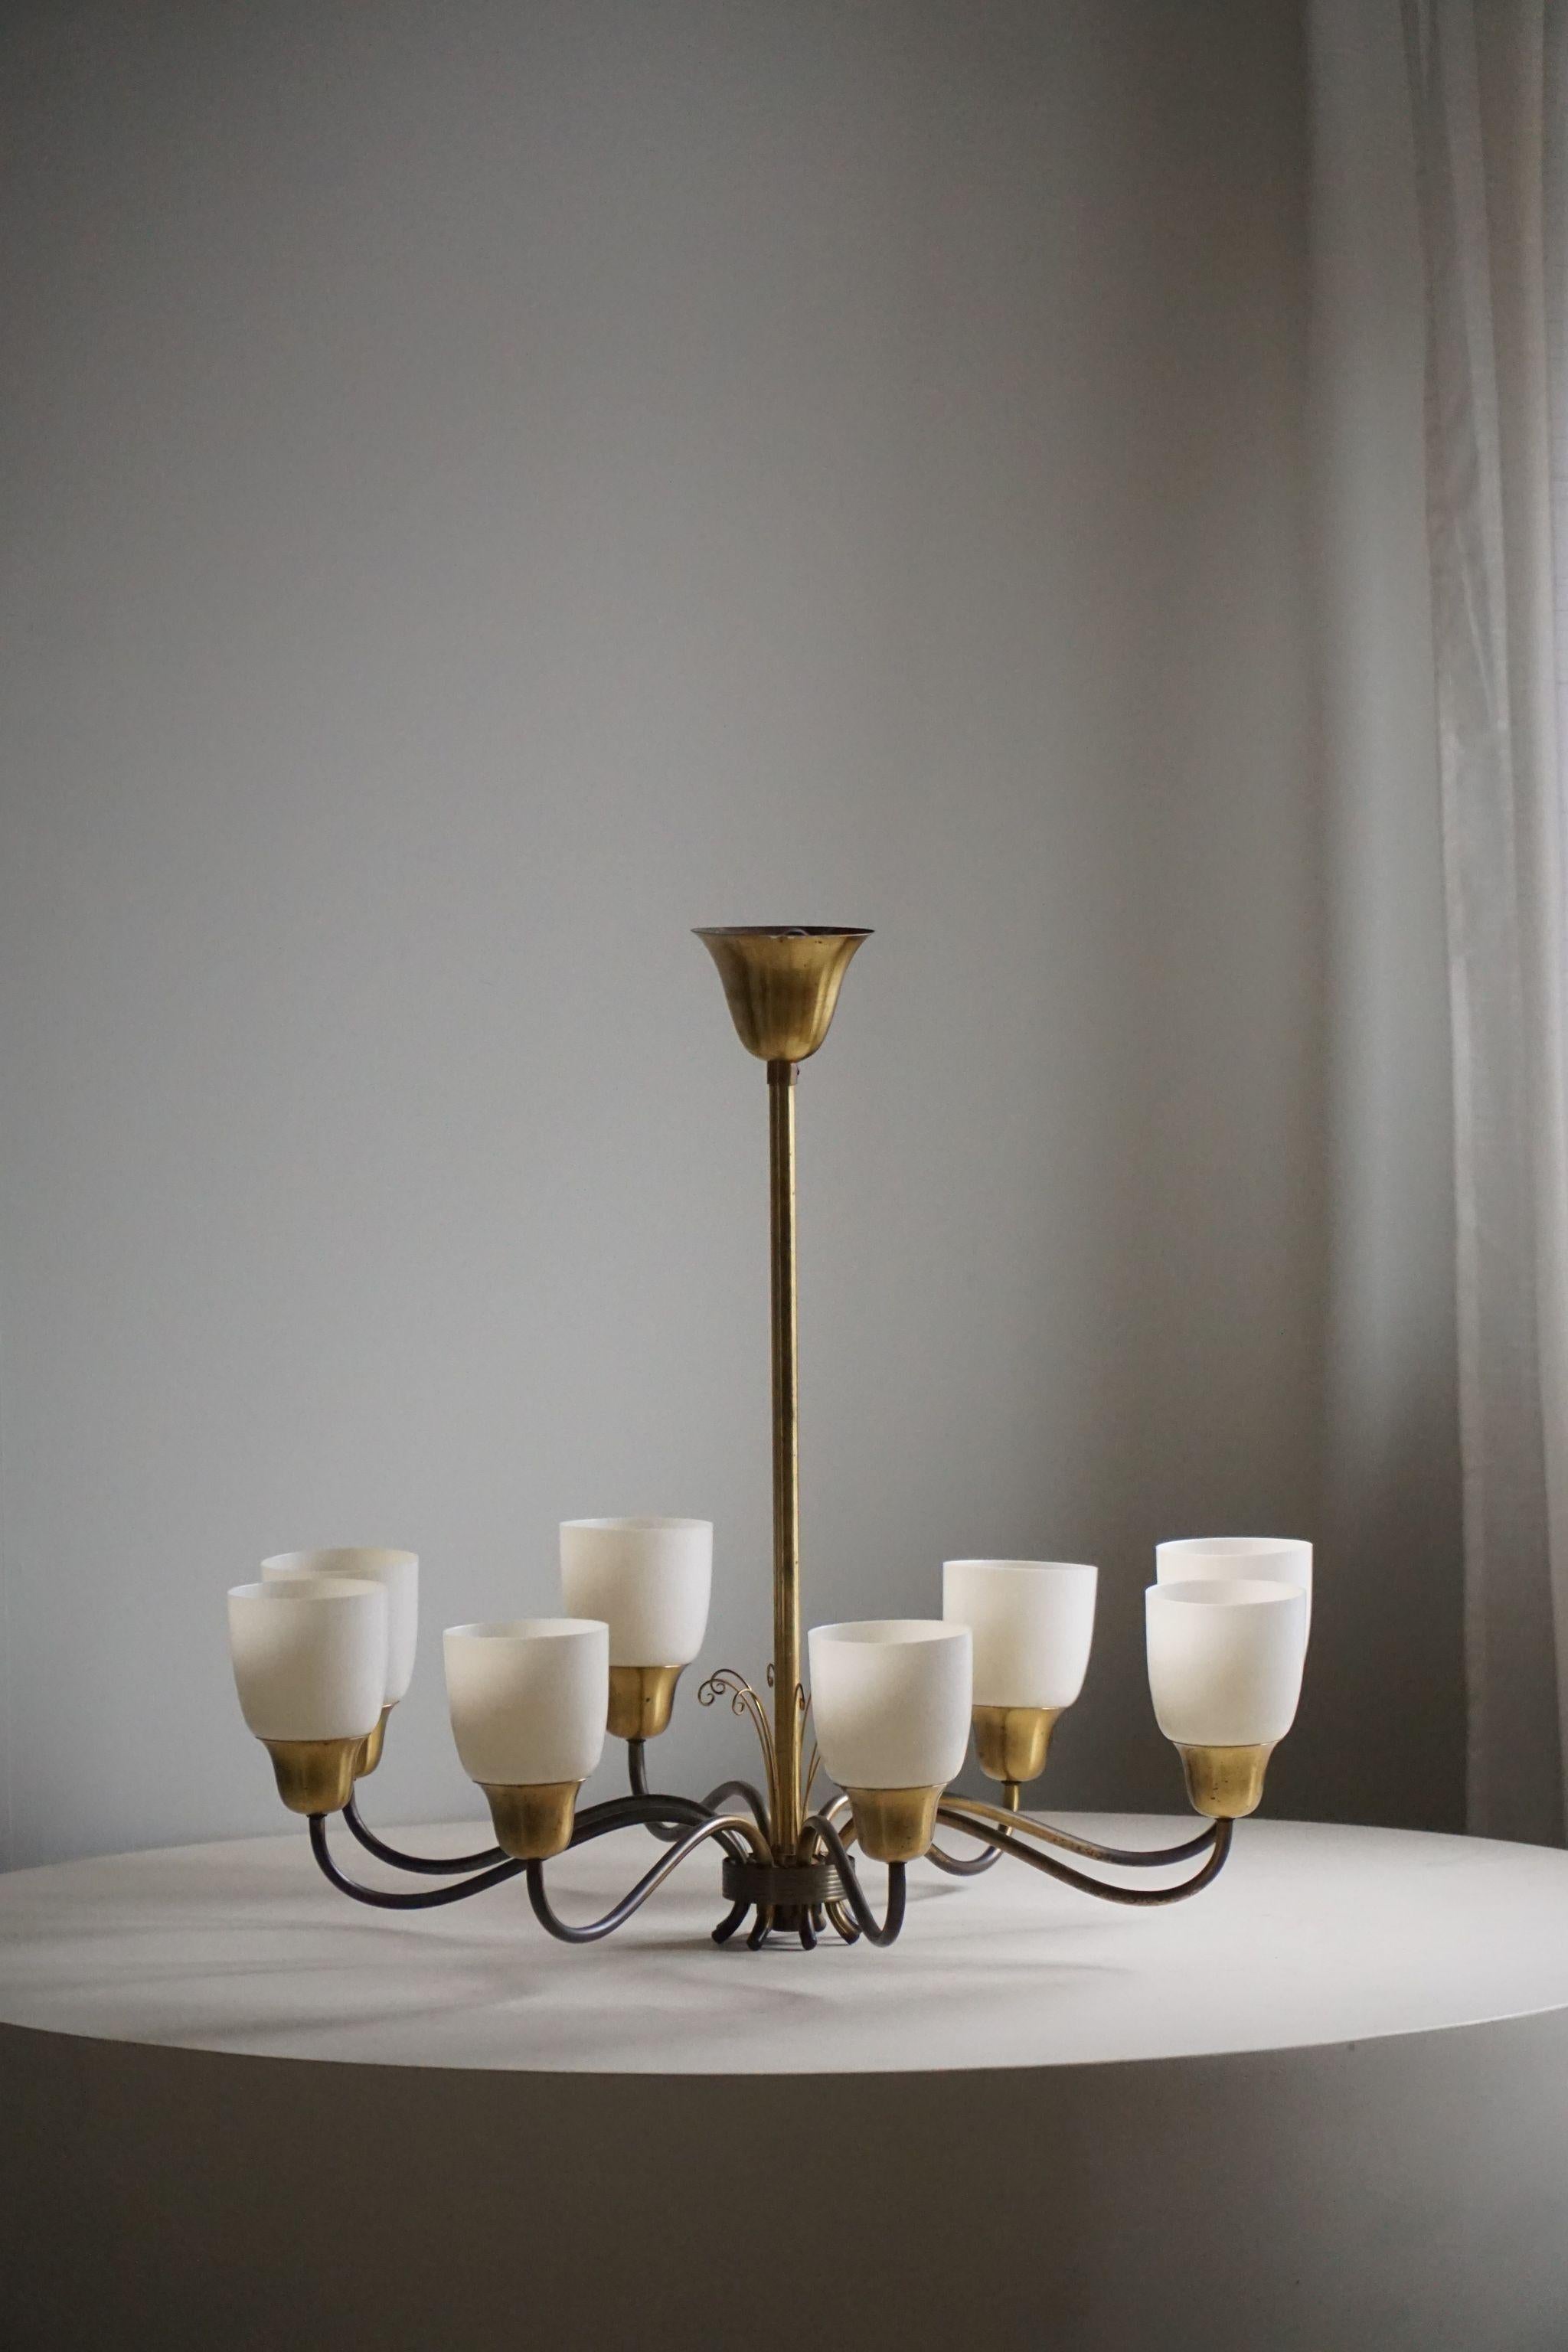 This Swedish Mid Century Modern chandelier from the 1950s features eight gracefully curved brass arms, each adorned with a plastic shade. With its minimalist design and clean lines, it embodies the sleek elegance characteristic of the era. Crafted